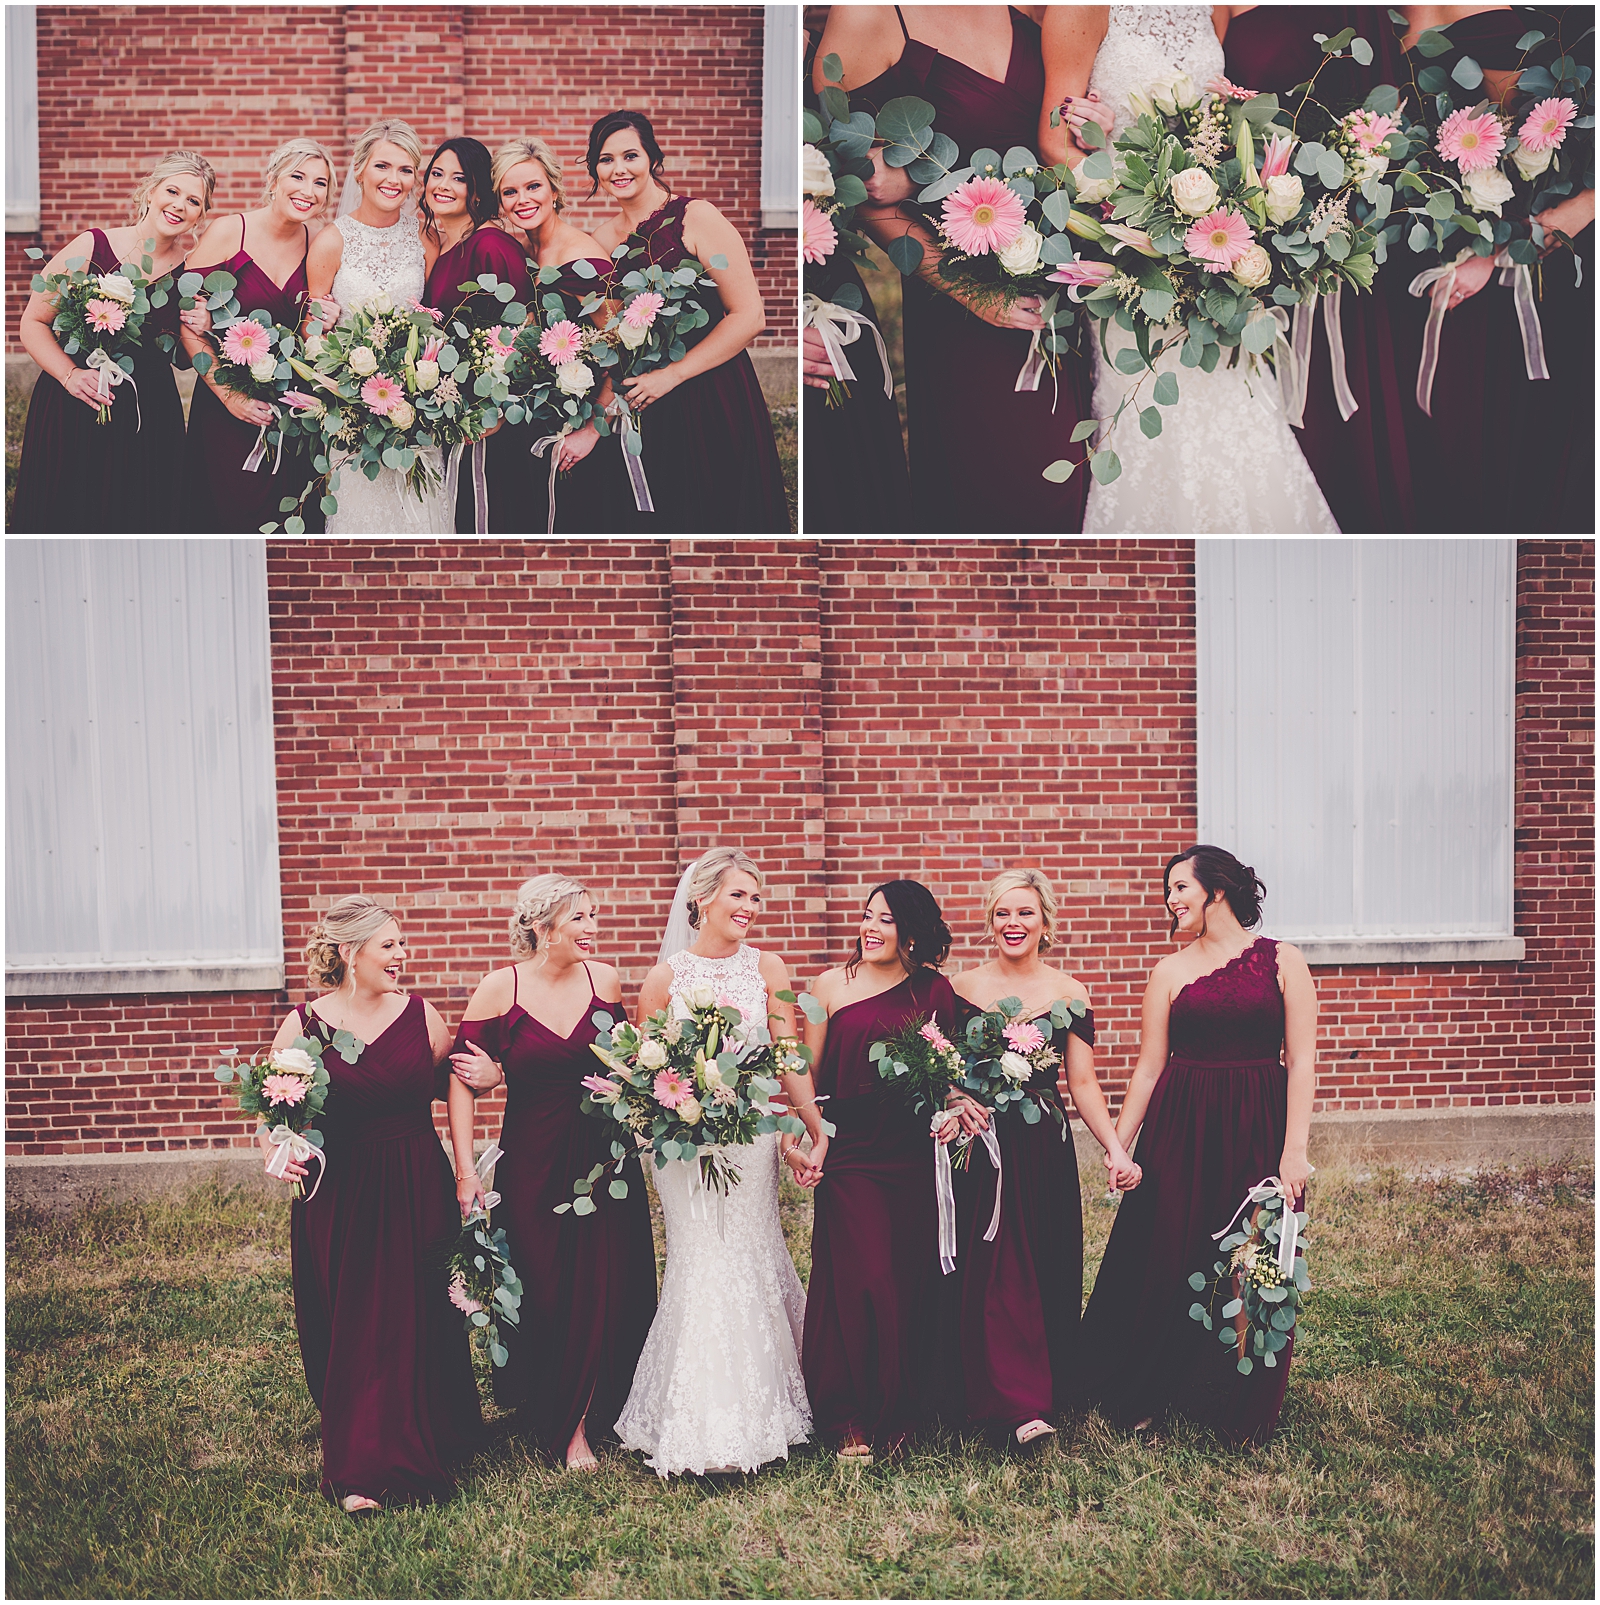 Cari and Nick's rustic fall cabernet and navy Round House Event Center wedding day in Beardstown, IL with Chicagoland wedding photographer Kara Evans Photographer.